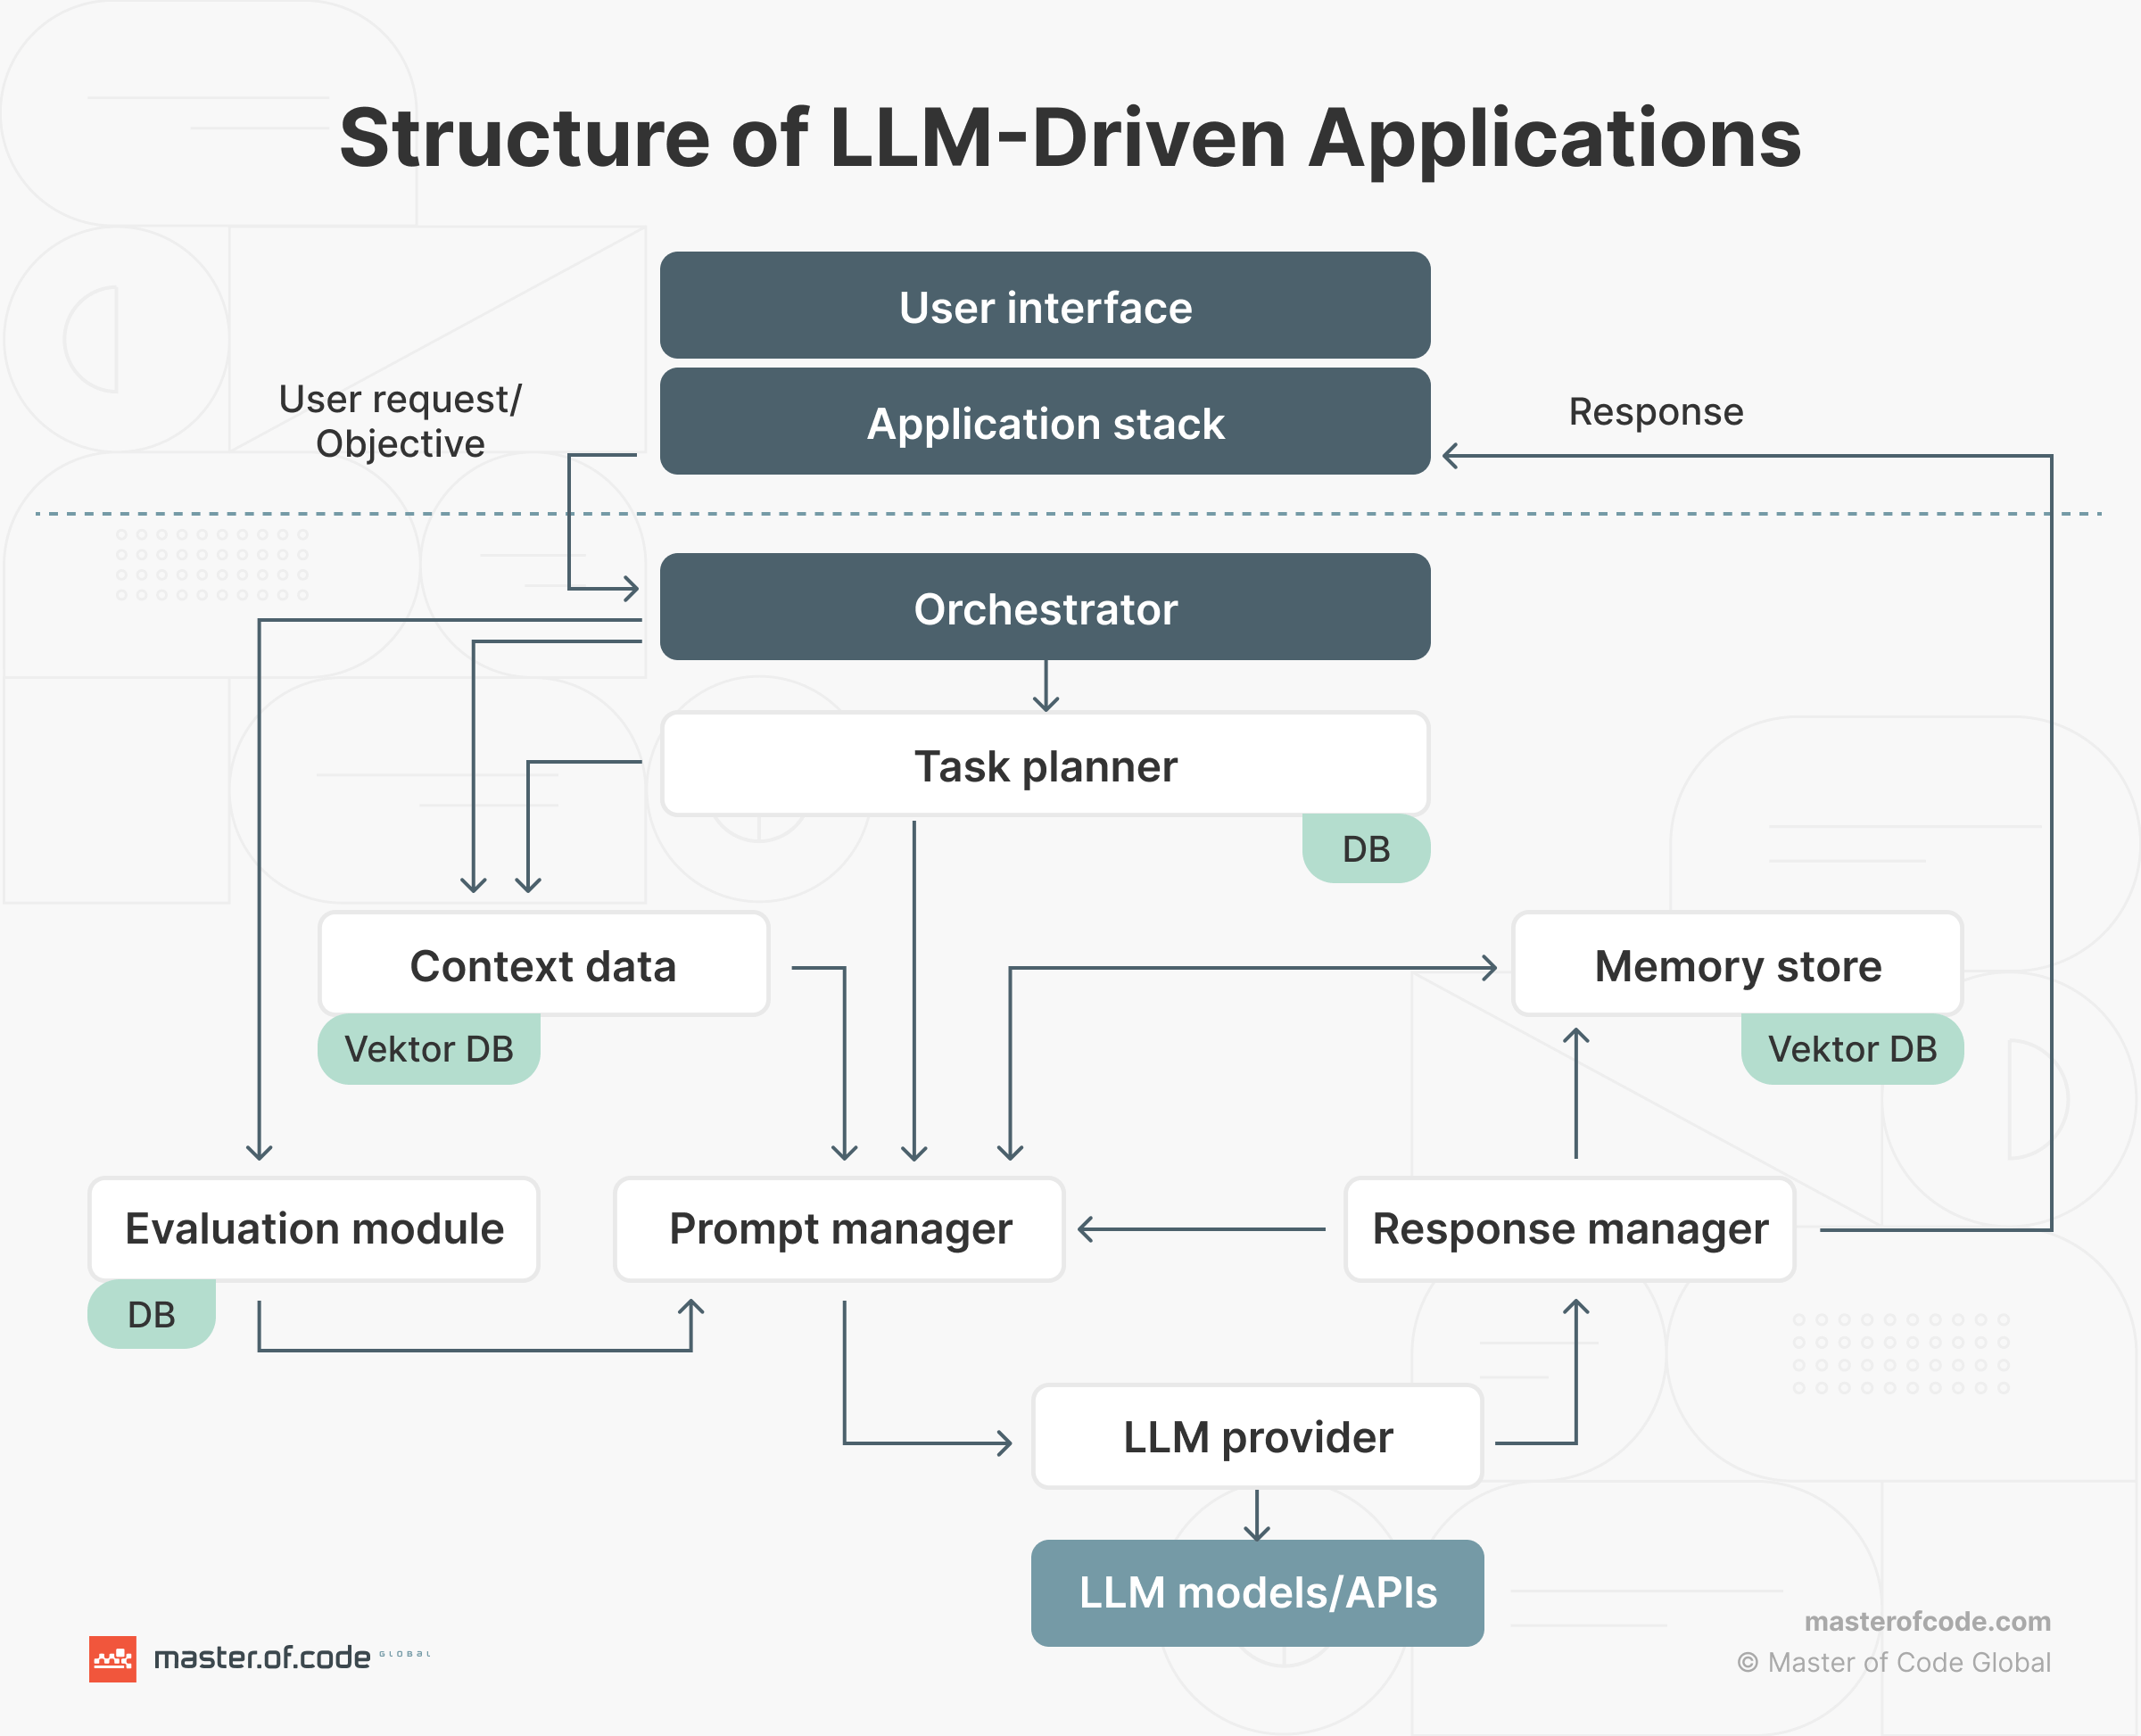 Structure of LLM-Driven Applications chart 